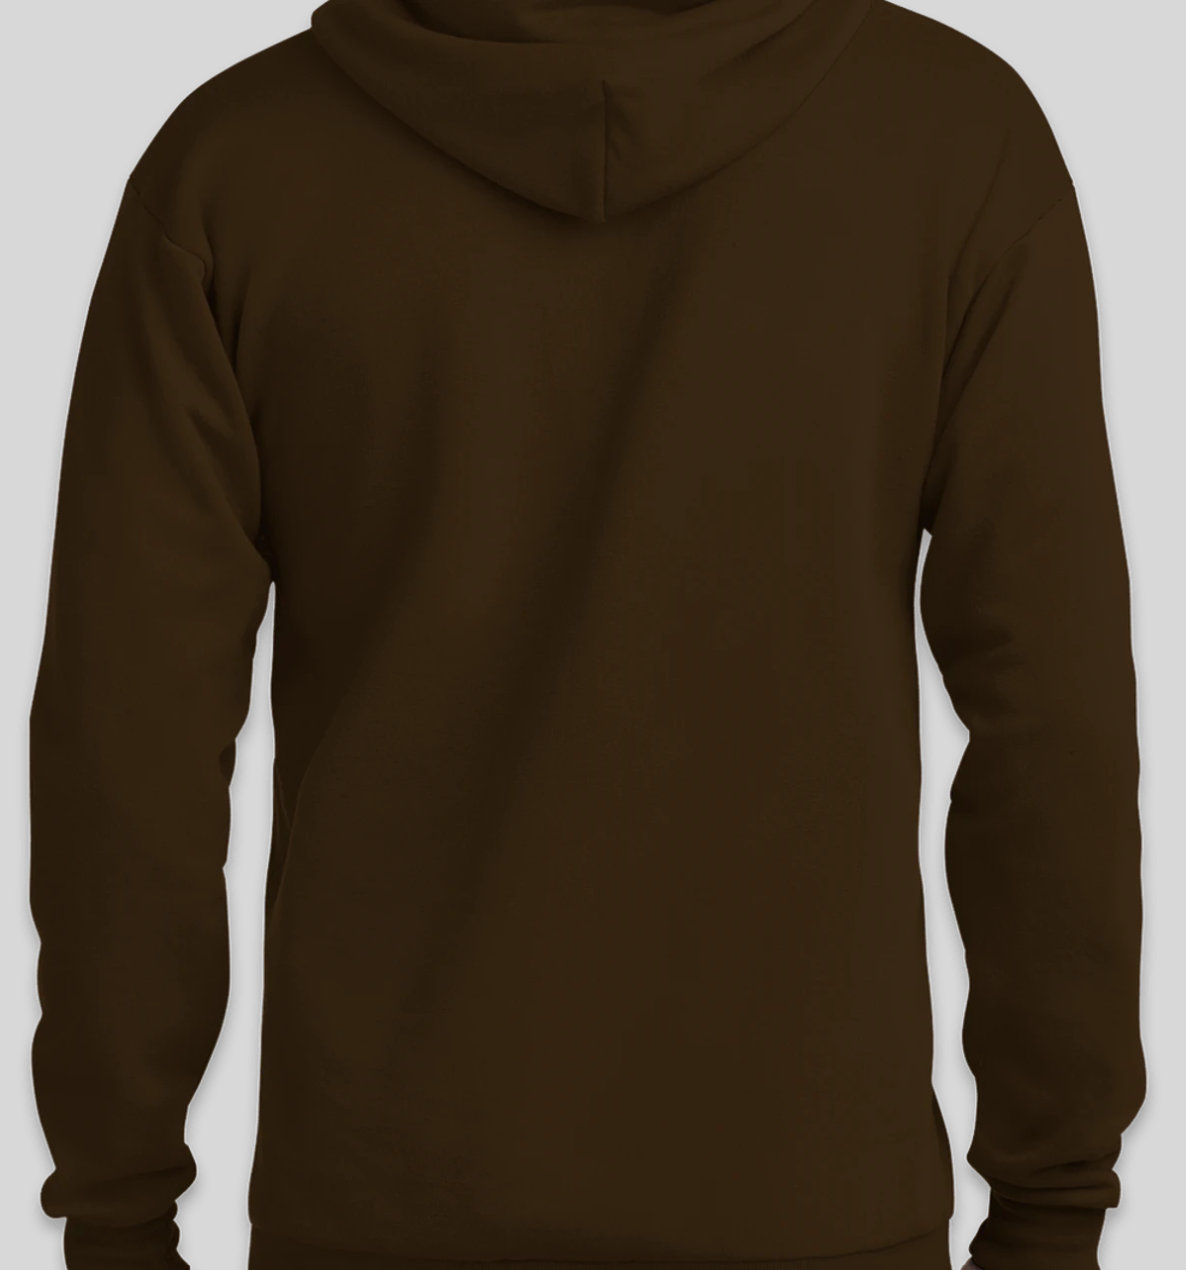 Seraph Hoodie (Colors Available)